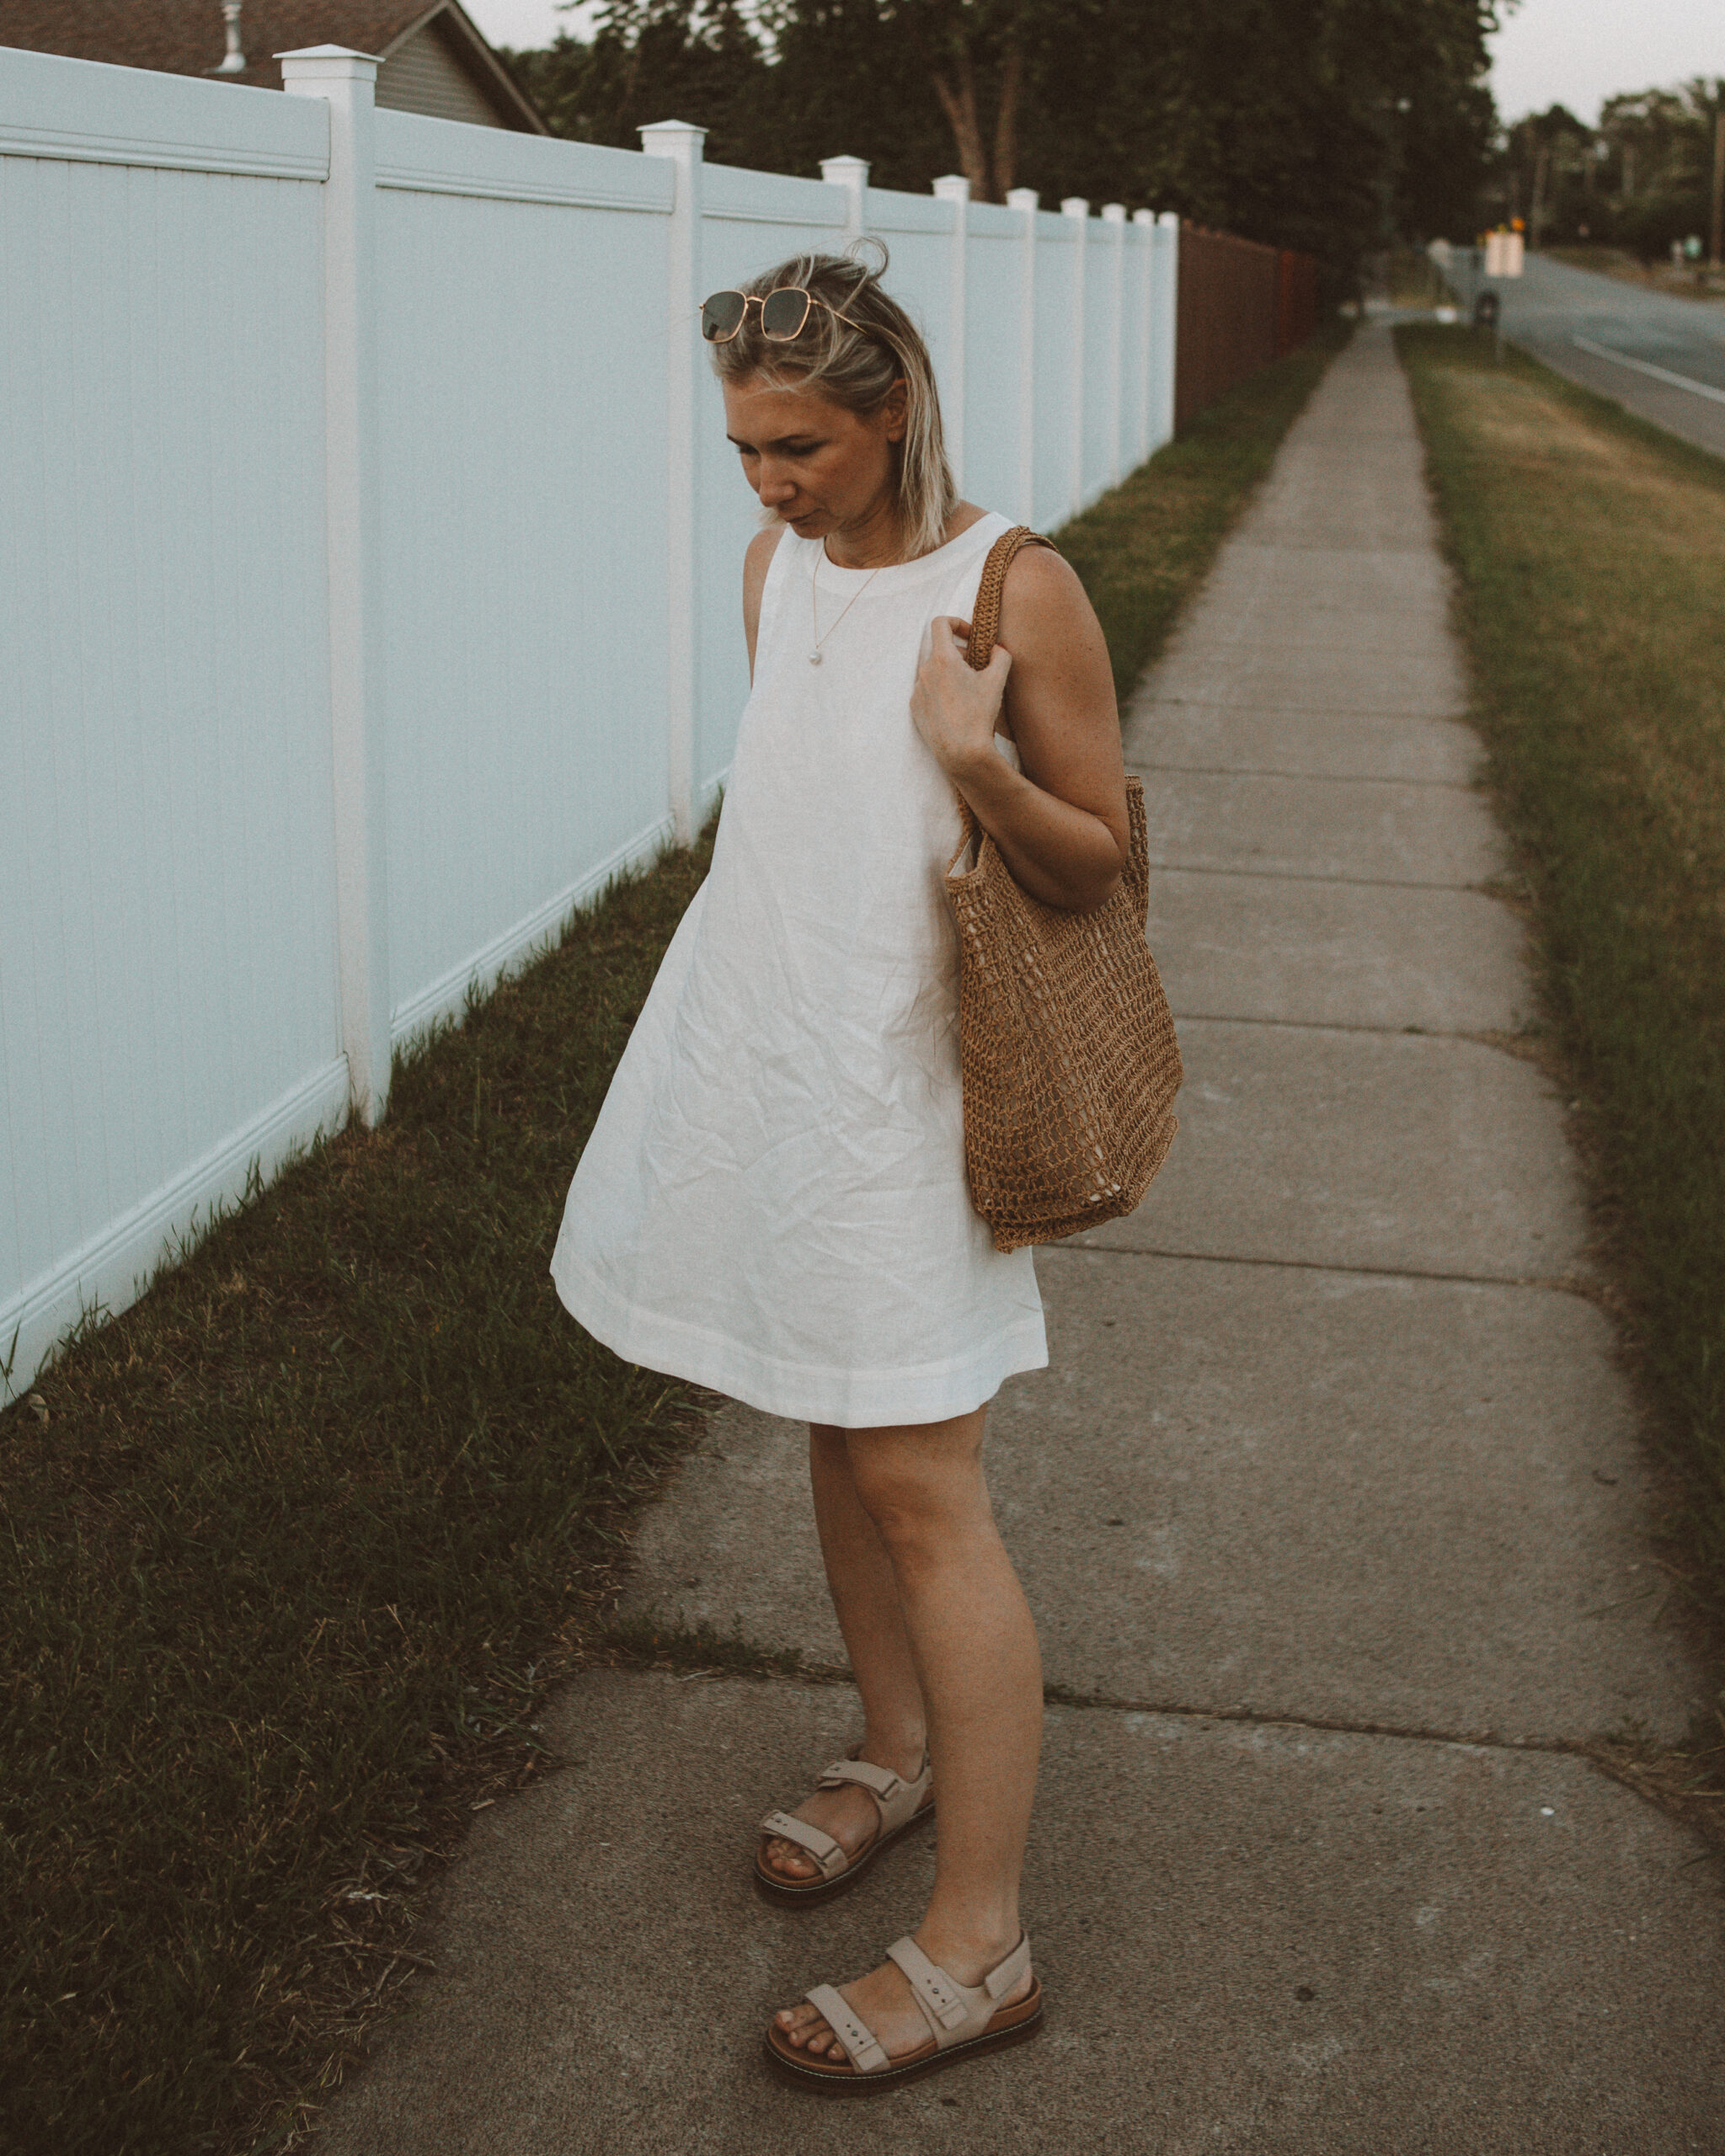 Karin Emily wears one of her favorite hot weather staples - a little white linen dress